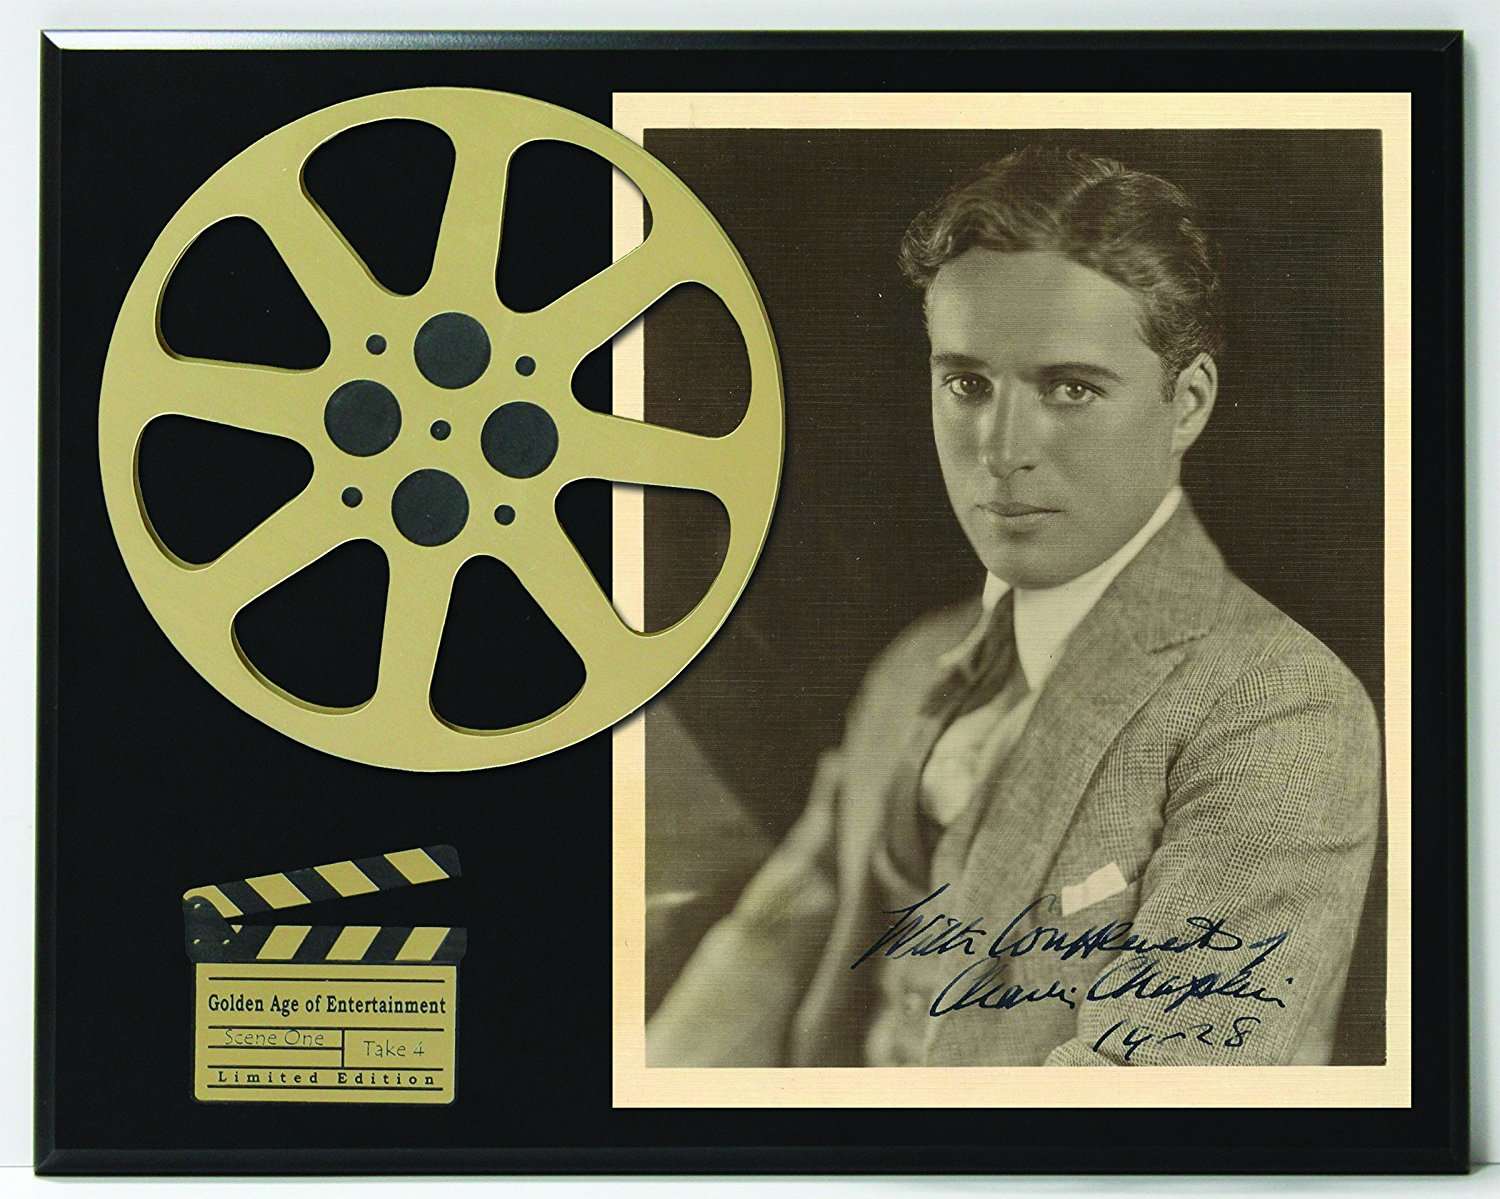 Charlie Chaplin Limited Edition Reproduction Autographed Movie Reel Display  K1 - Gold Record Outlet Album and Disc Collectible Memorabilia